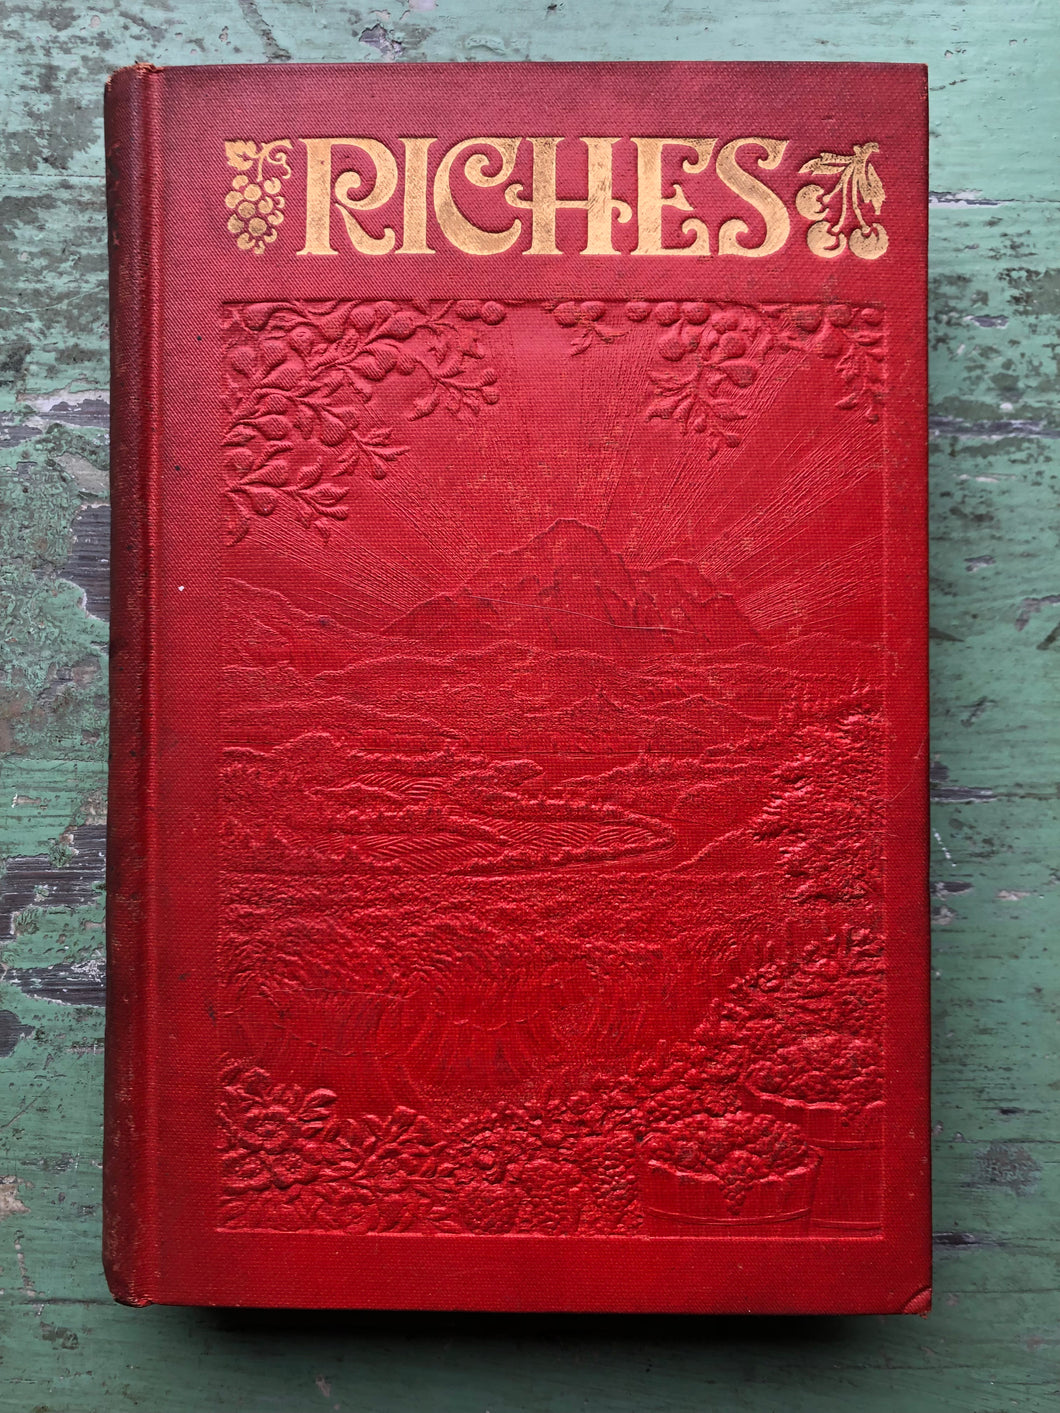 Riches. by J. F. Rutherford